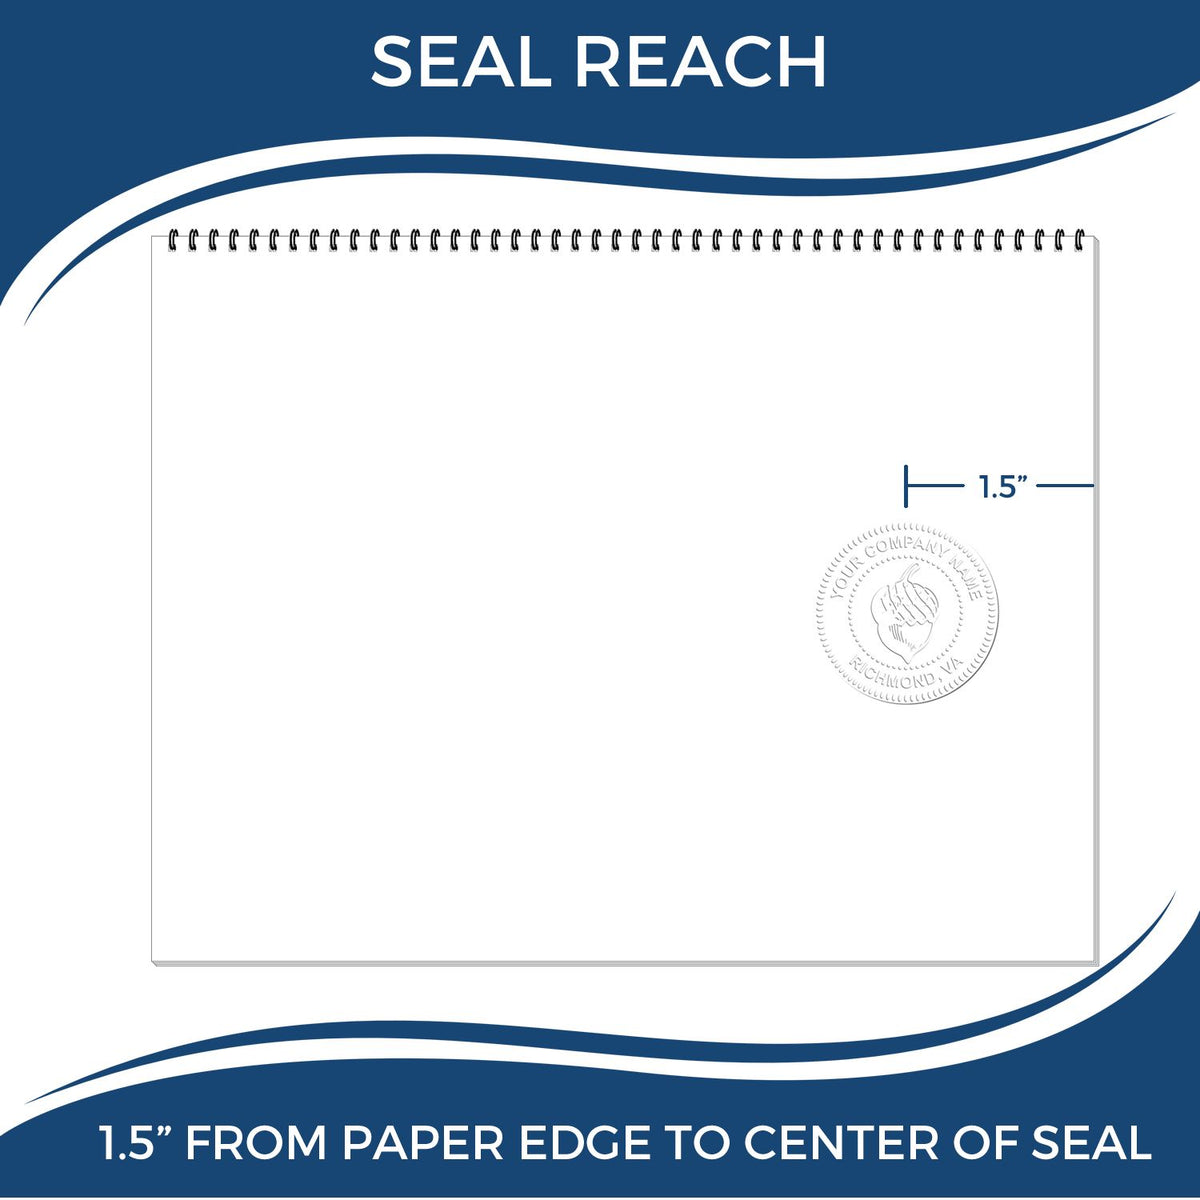 An infographic showing the seal reach which is represented by a ruler and a miniature seal image of the Gift West Virginia Geologist Seal